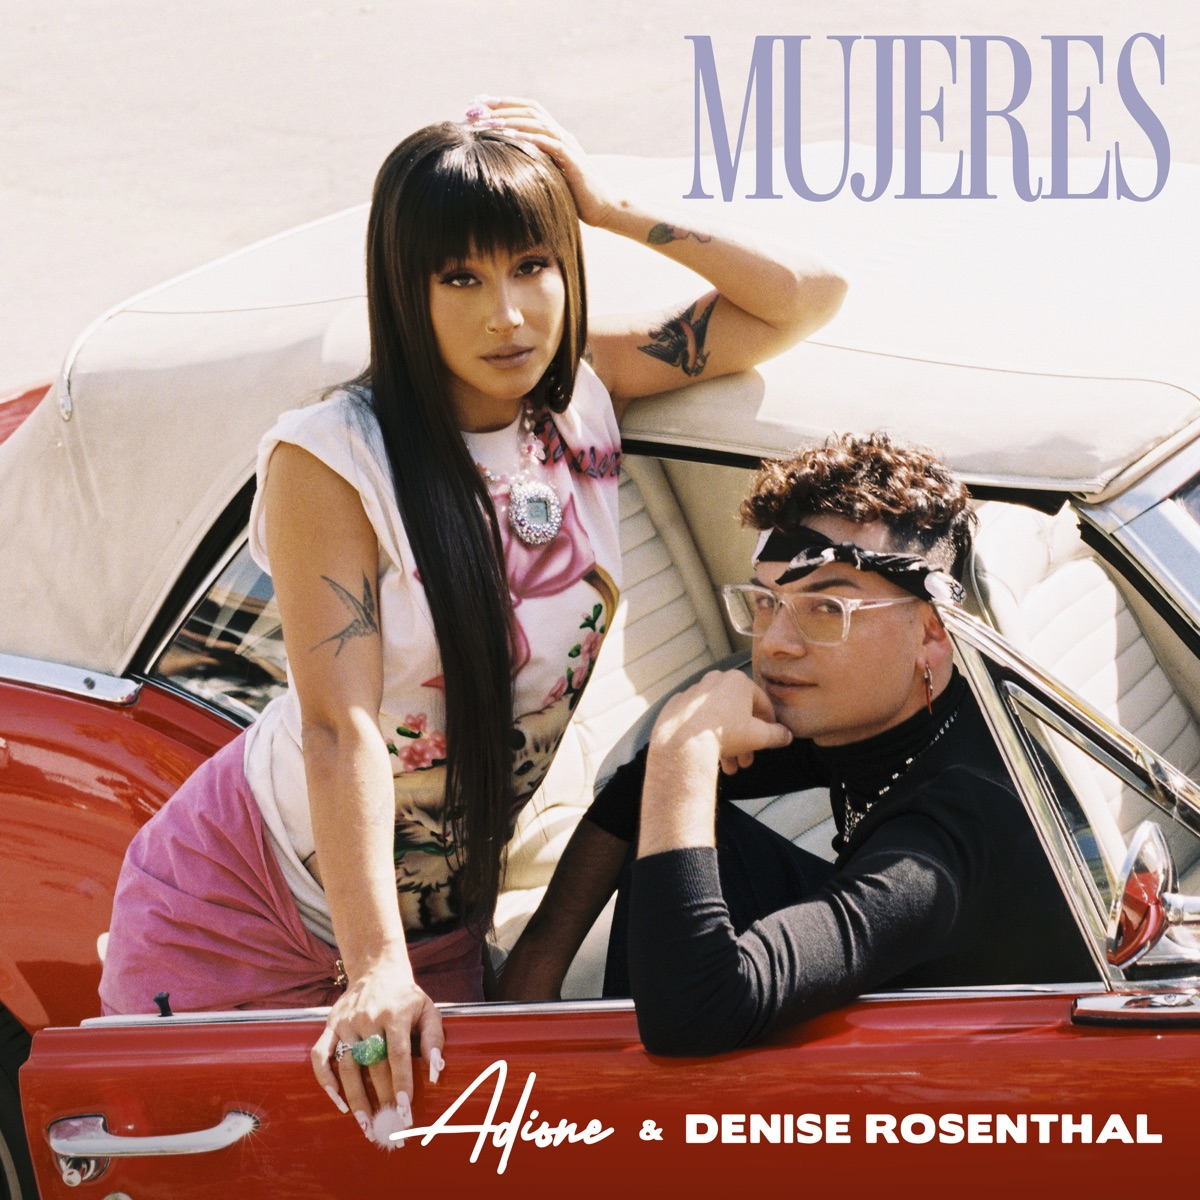 ADIONE & Denise Rosenthal Mujeres cover artwork